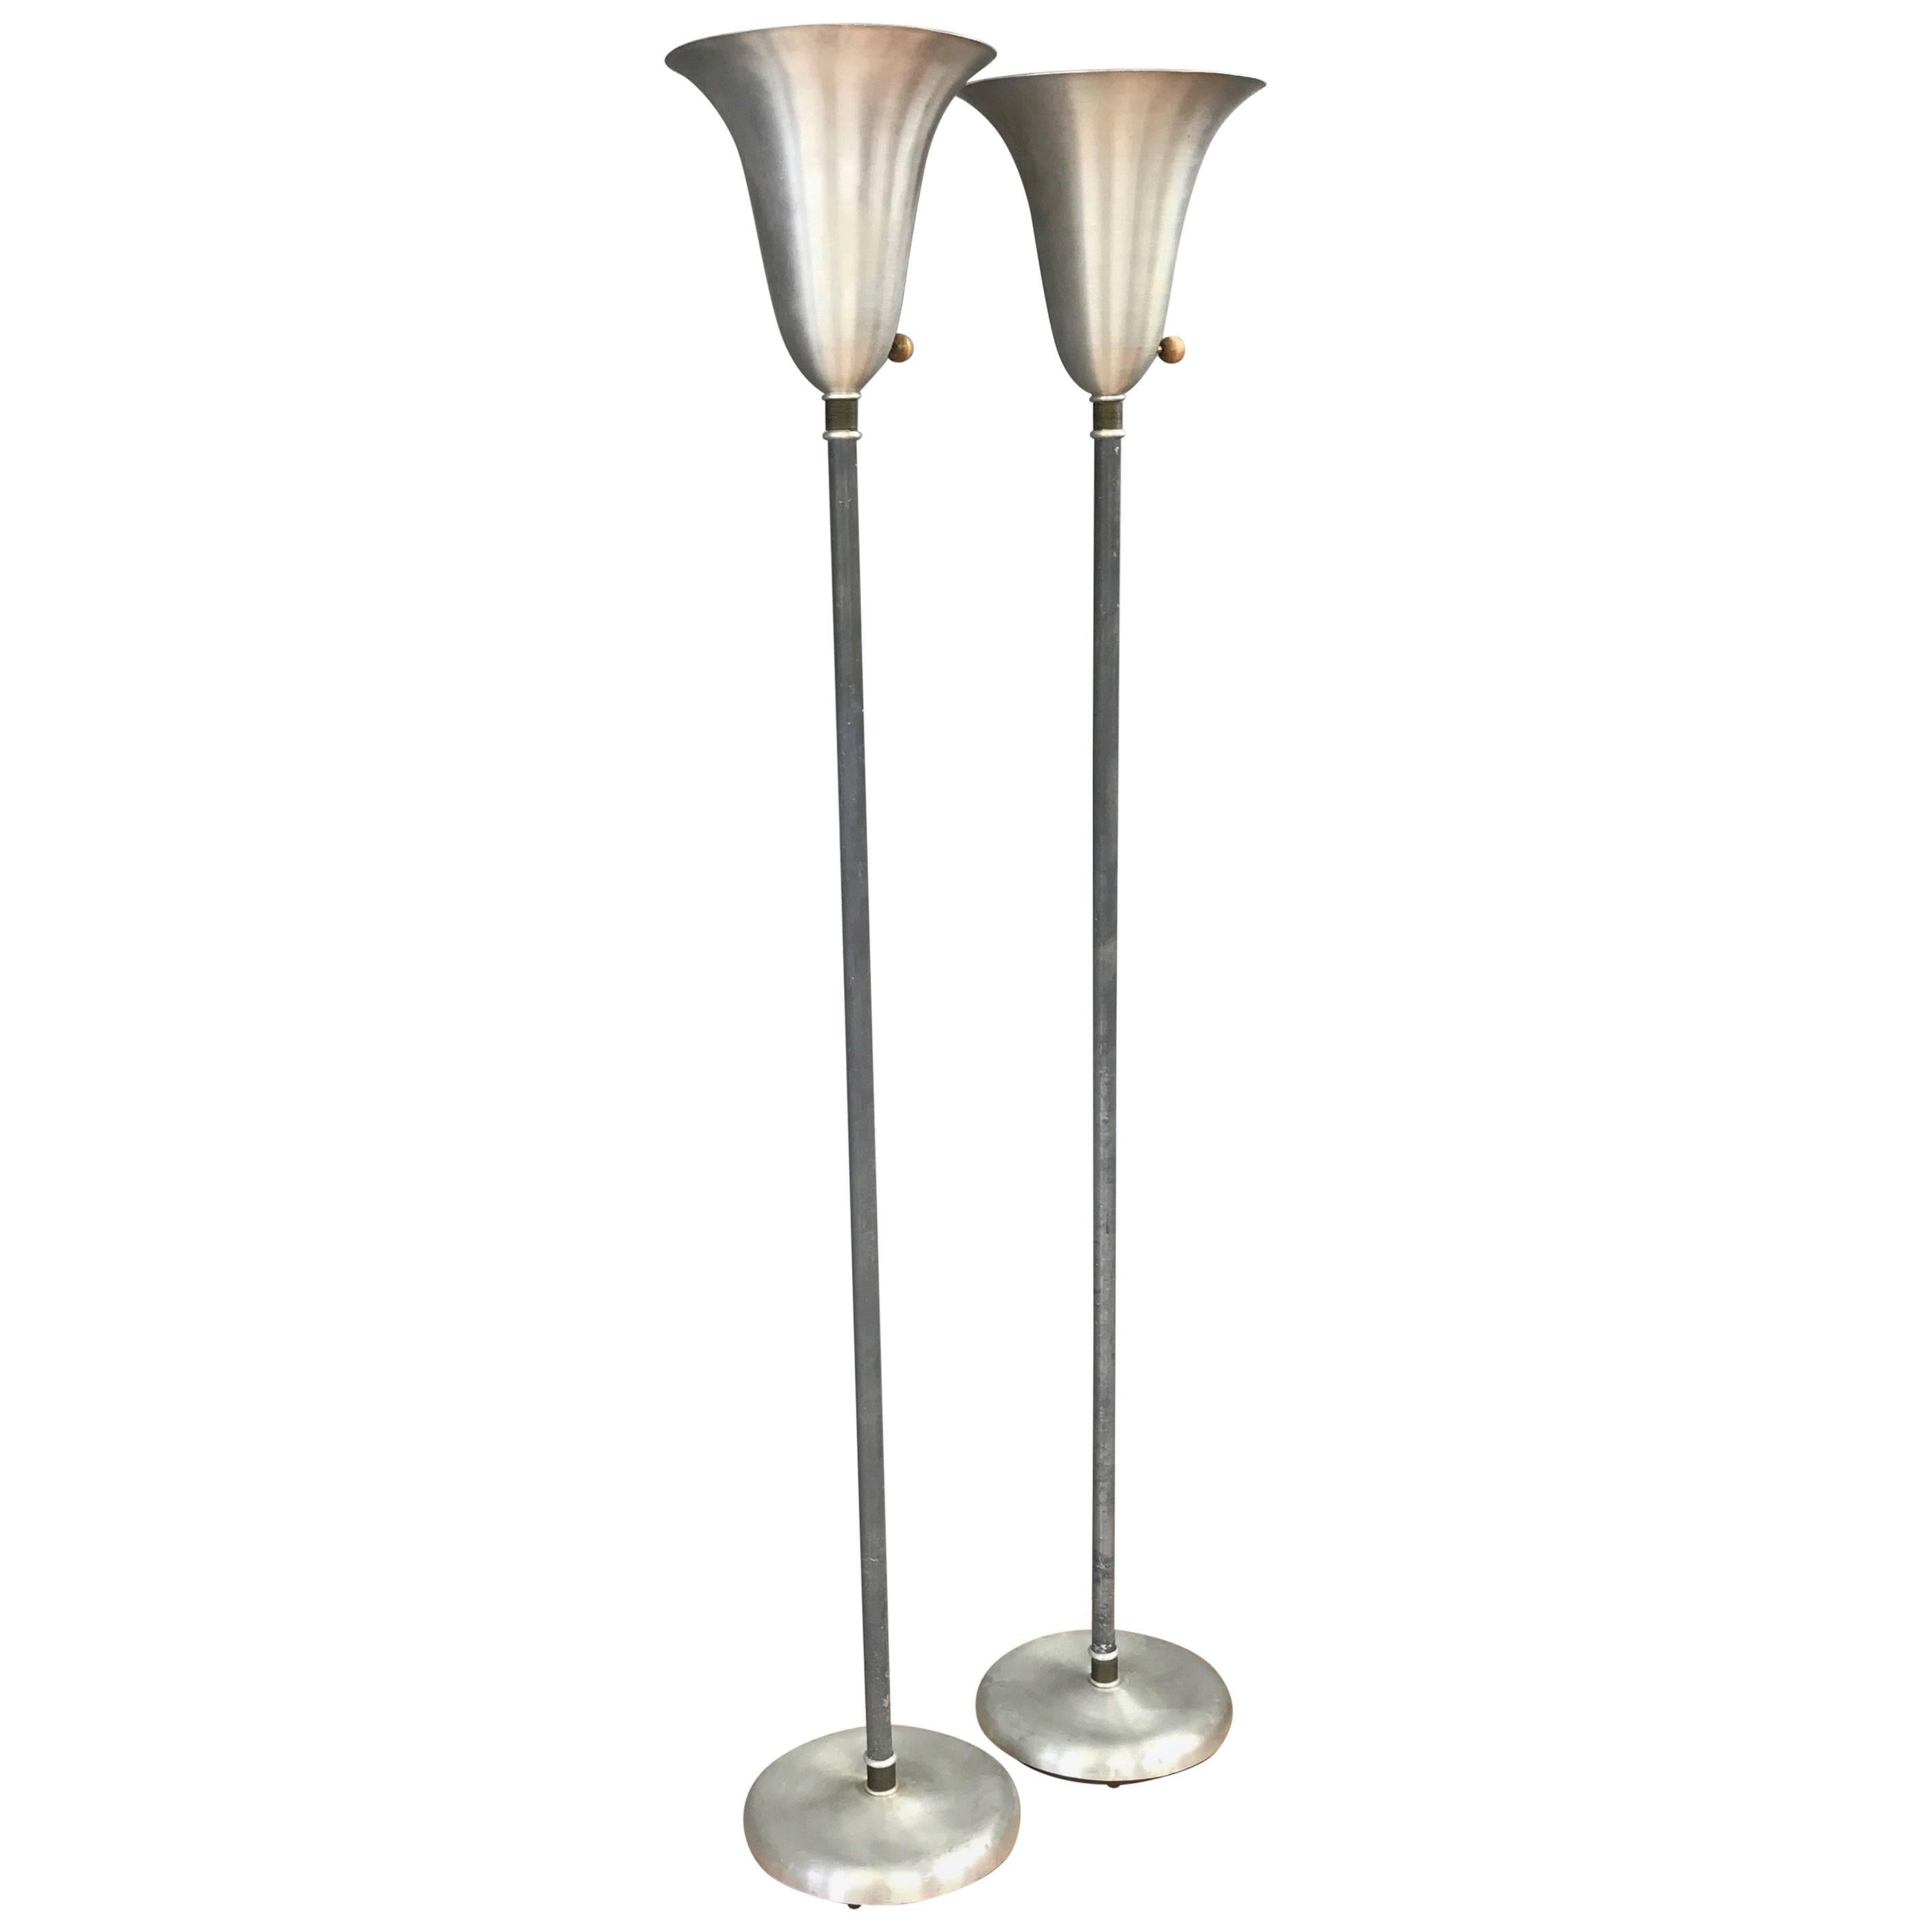 A pair of American Modern spun aluminium torchiere floor lamps with brass details by Russel Wright.

An unpretentious example of Wright’s singular ability to streamline and democratize Art Deco aesthetics and materials, a talent that proved hugely